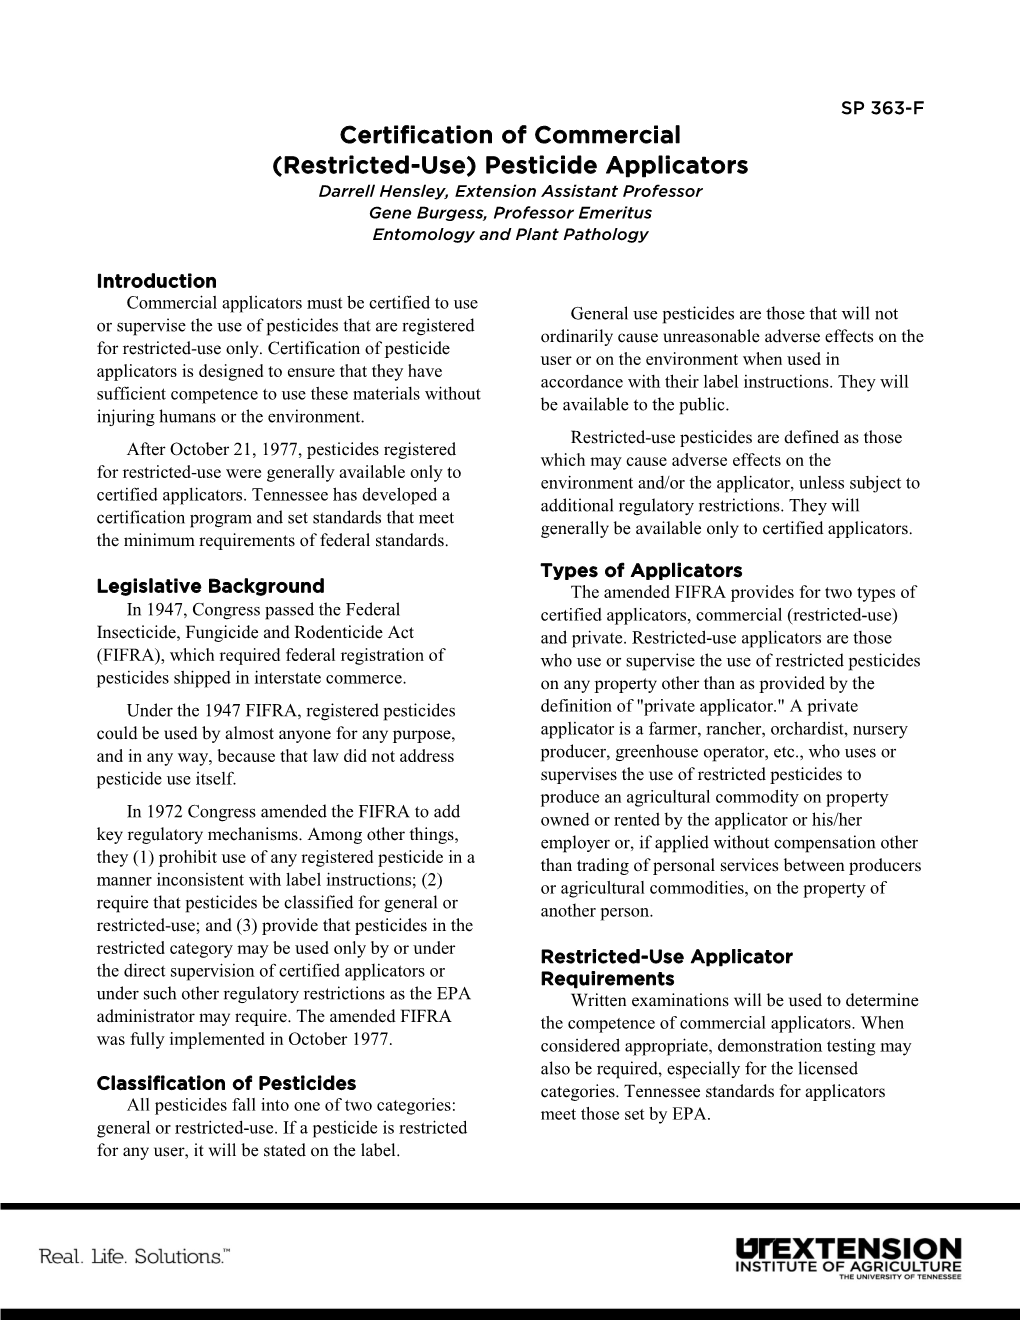 Certification of Commercial (Restricted-Use) Pesticide Applicators